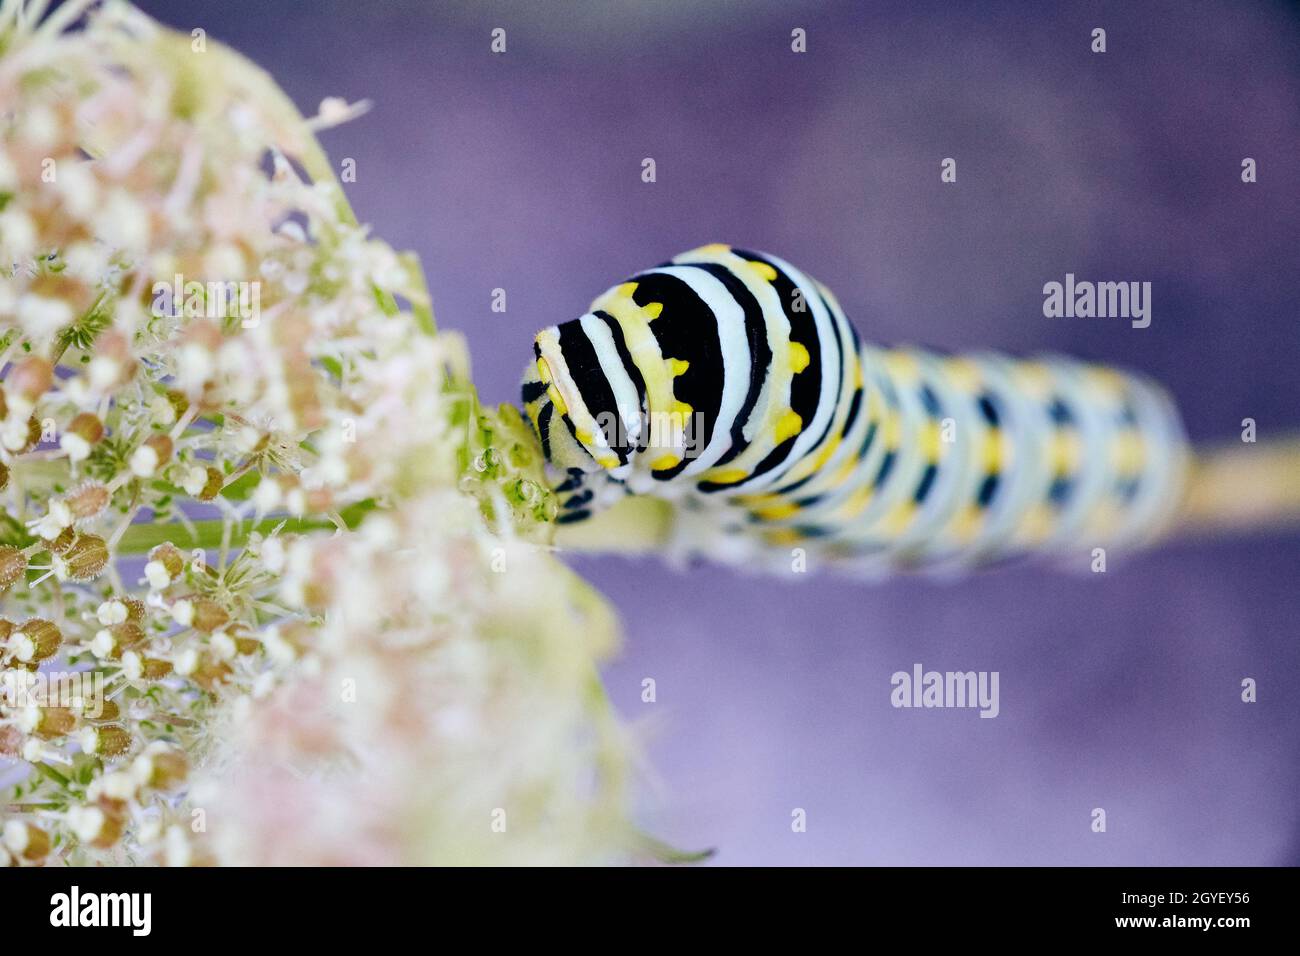 Looking down on white, yellow, and black stripped caterpillar climbing white flower Stock Photo